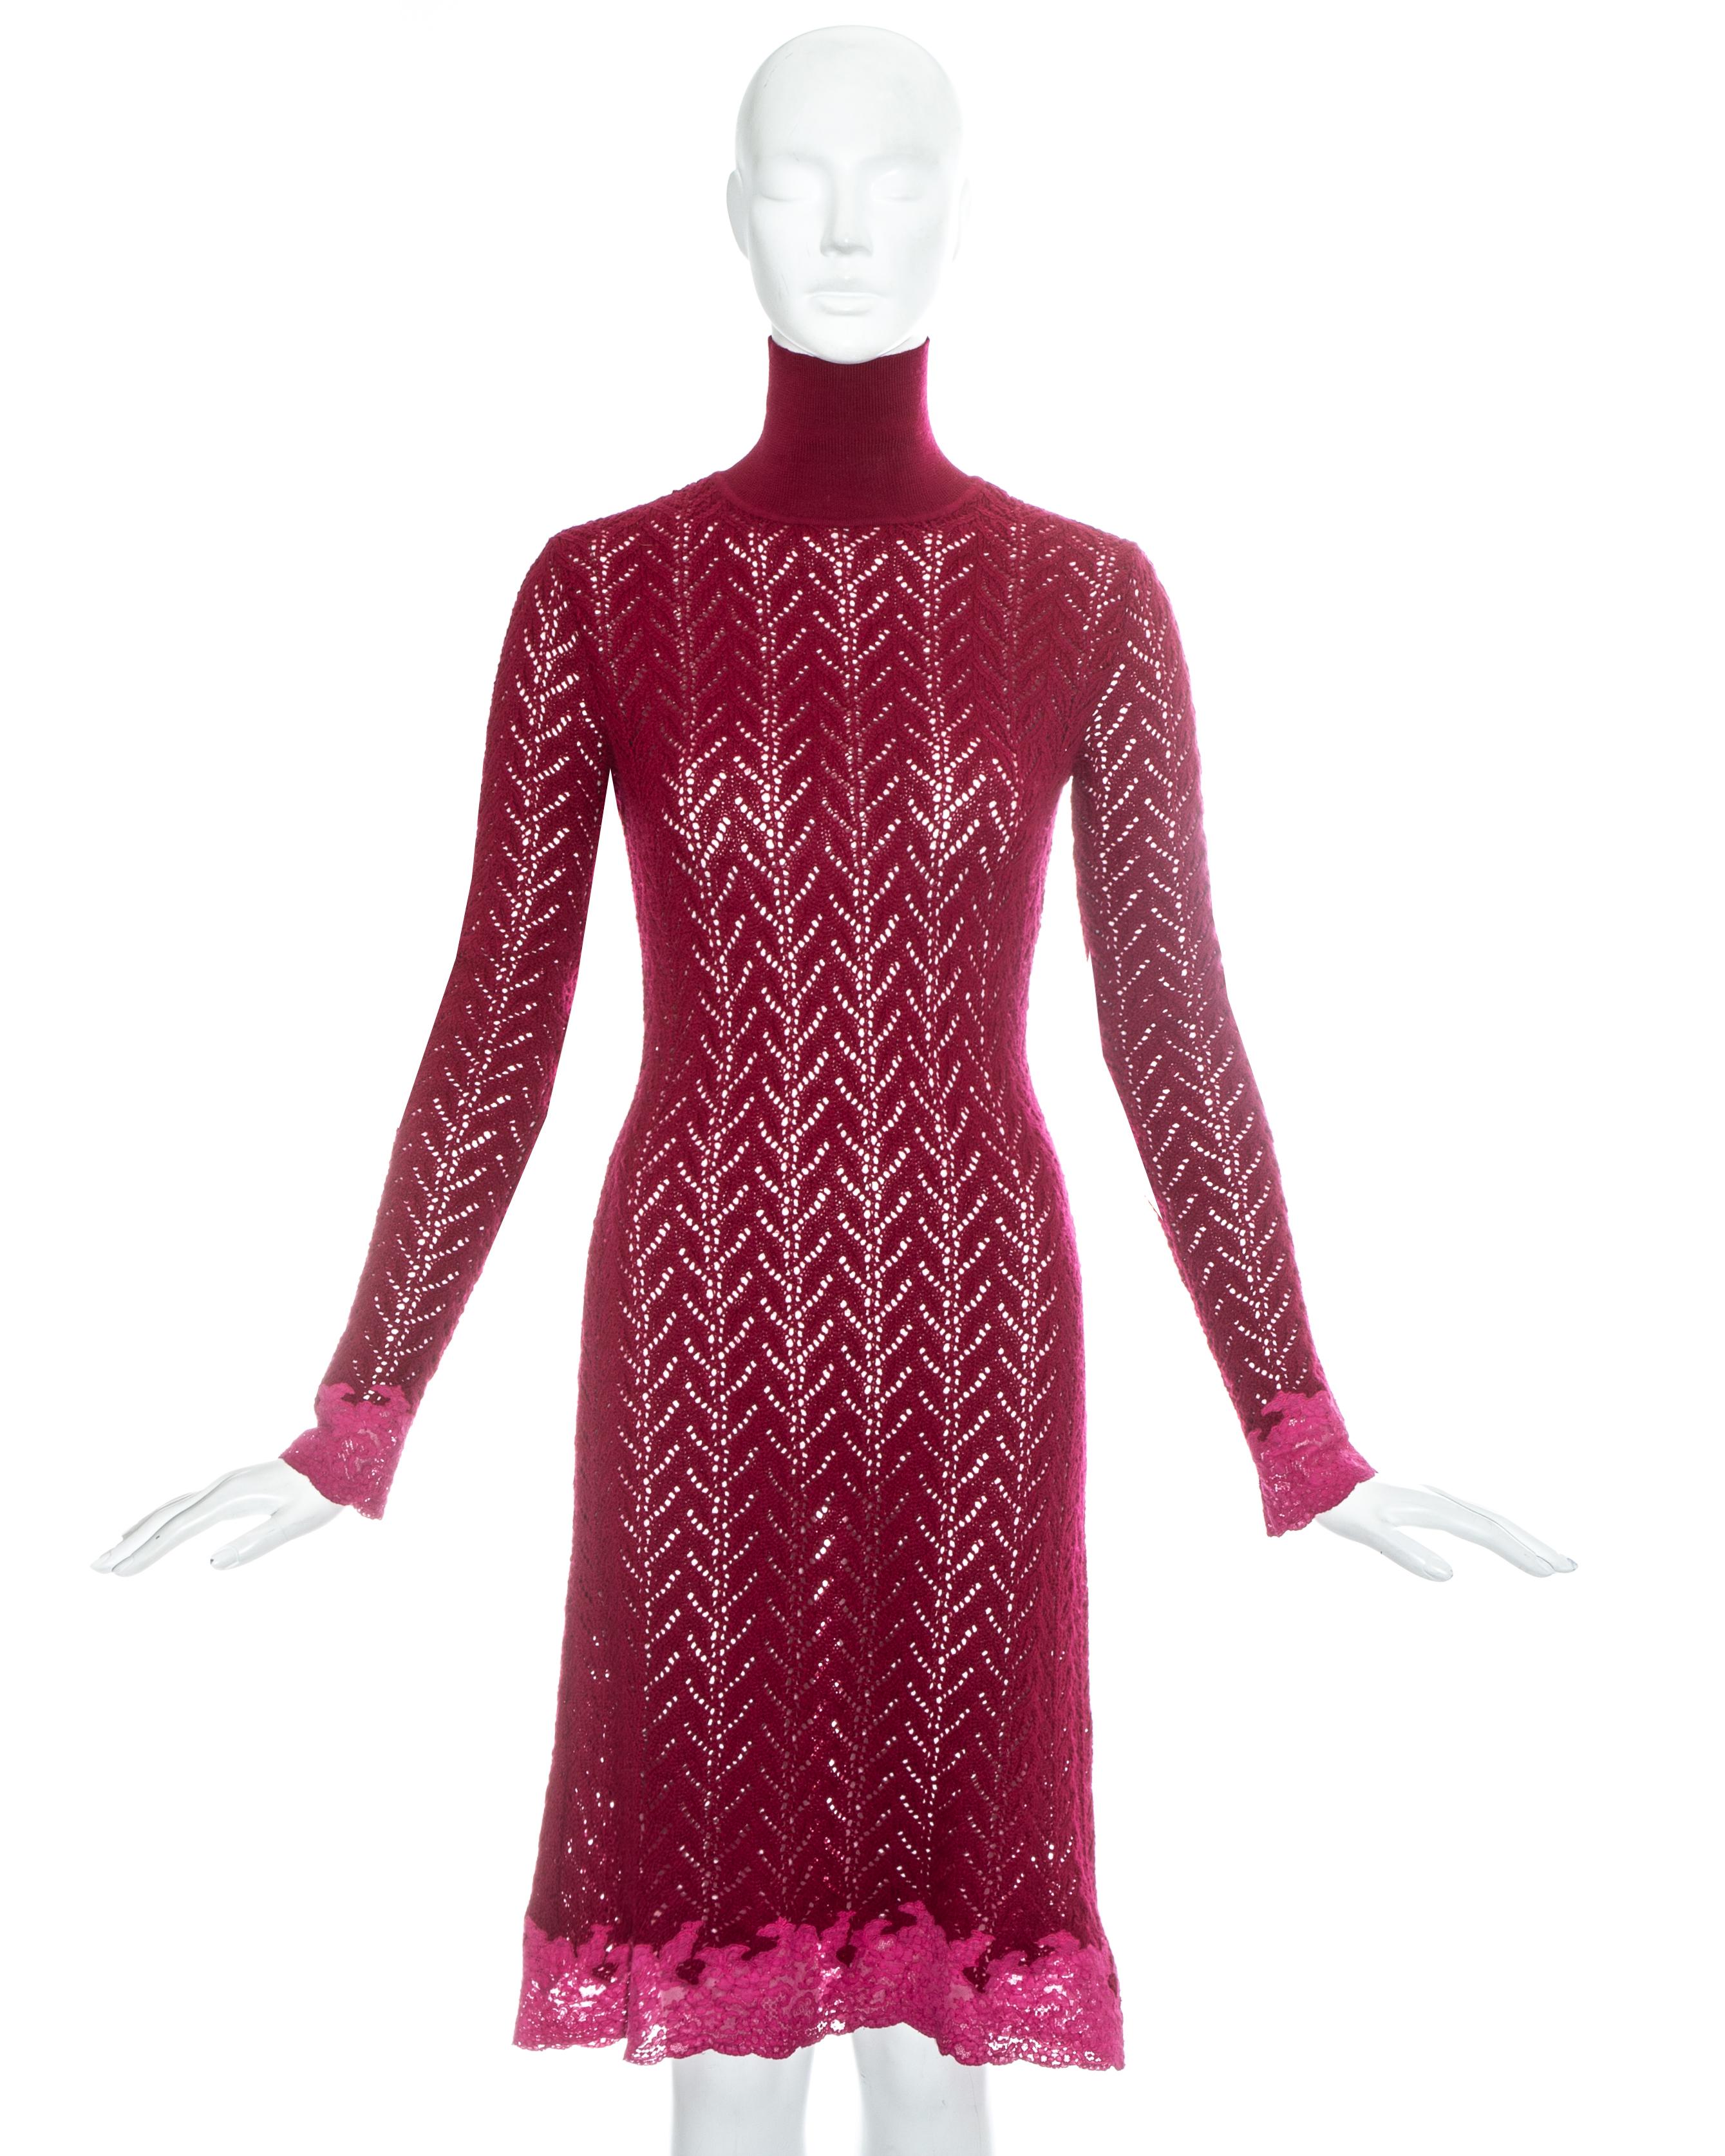 Christian Dior by John Galliano, red crochet knit mid-length sweater dress with turtle neck and lingerie style pink lace trim on skirt.

Fall-Winter 1998